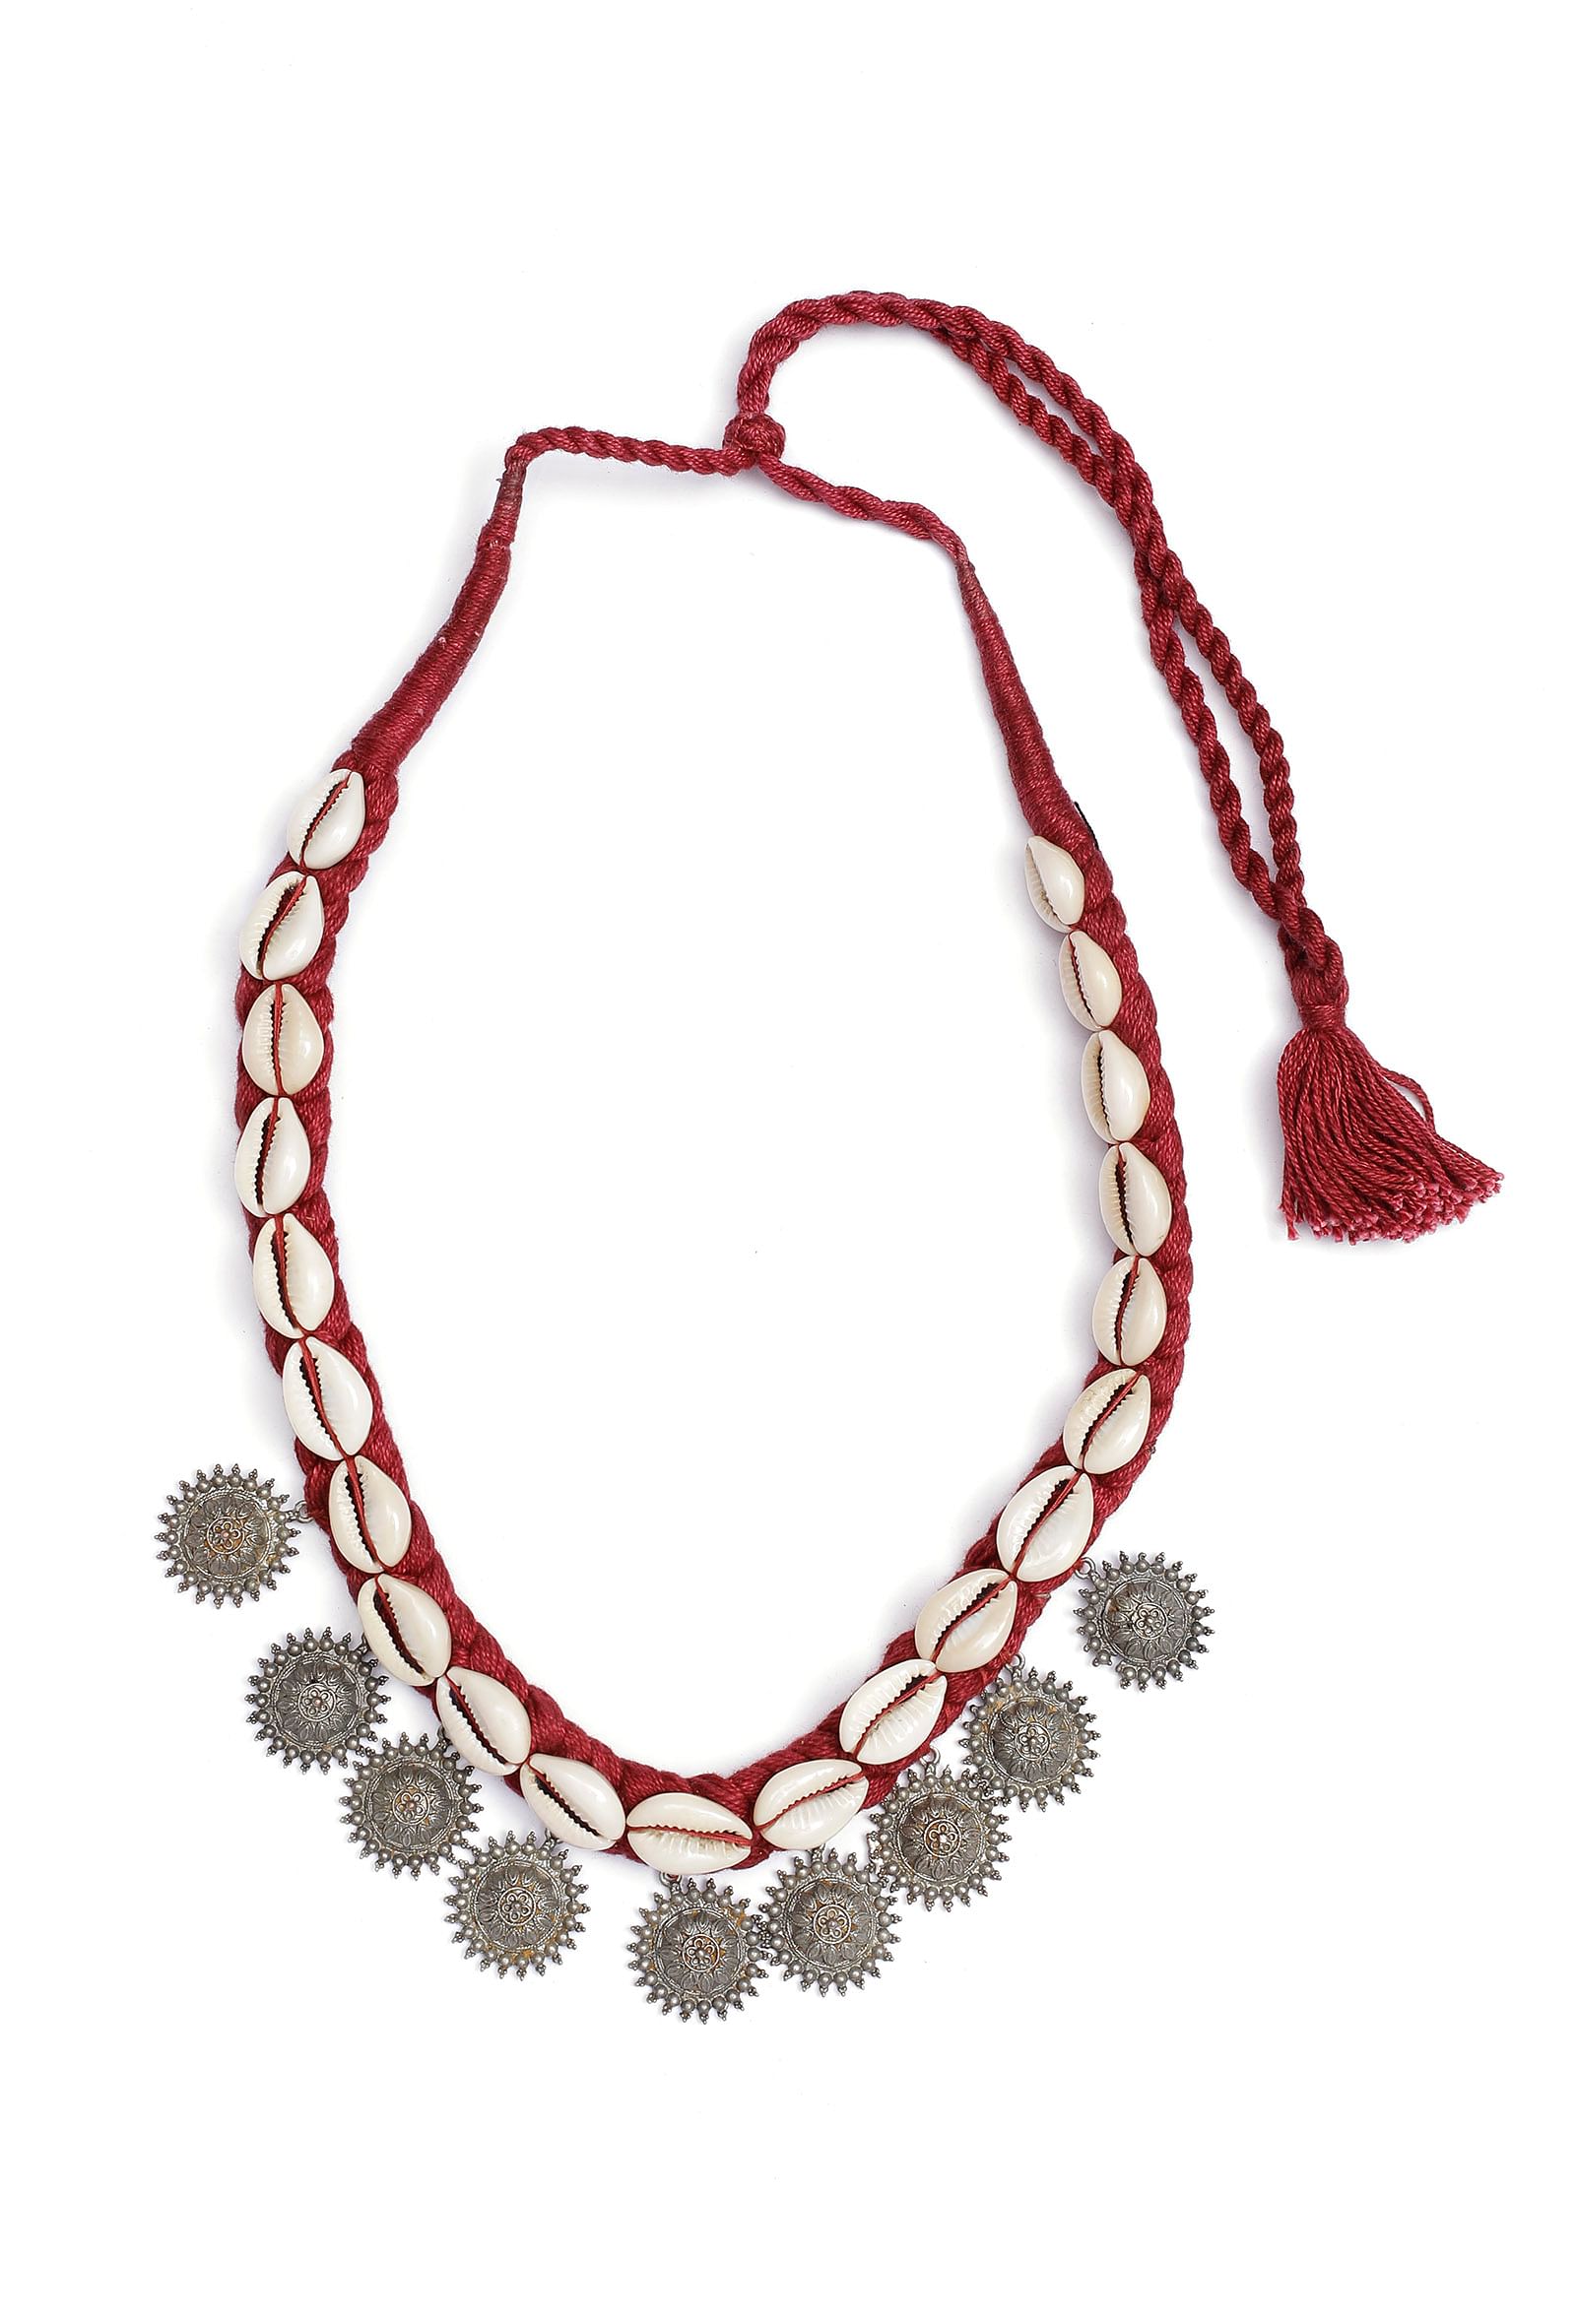 Sidham Red Cowrie Shell Tribal Necklace